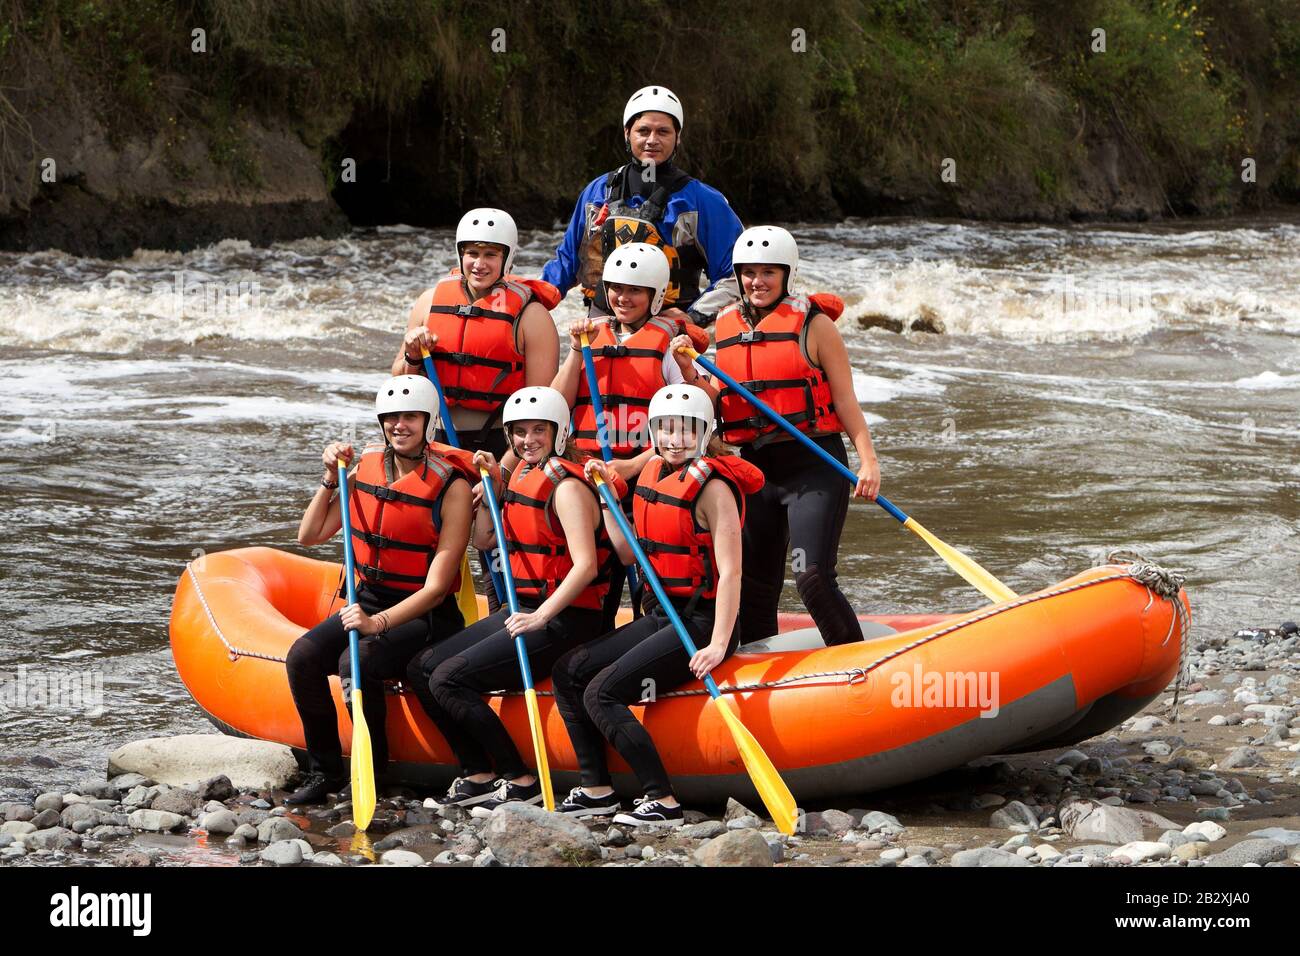 Large Group Of Young People Ready To Go Rafting Stock Photo